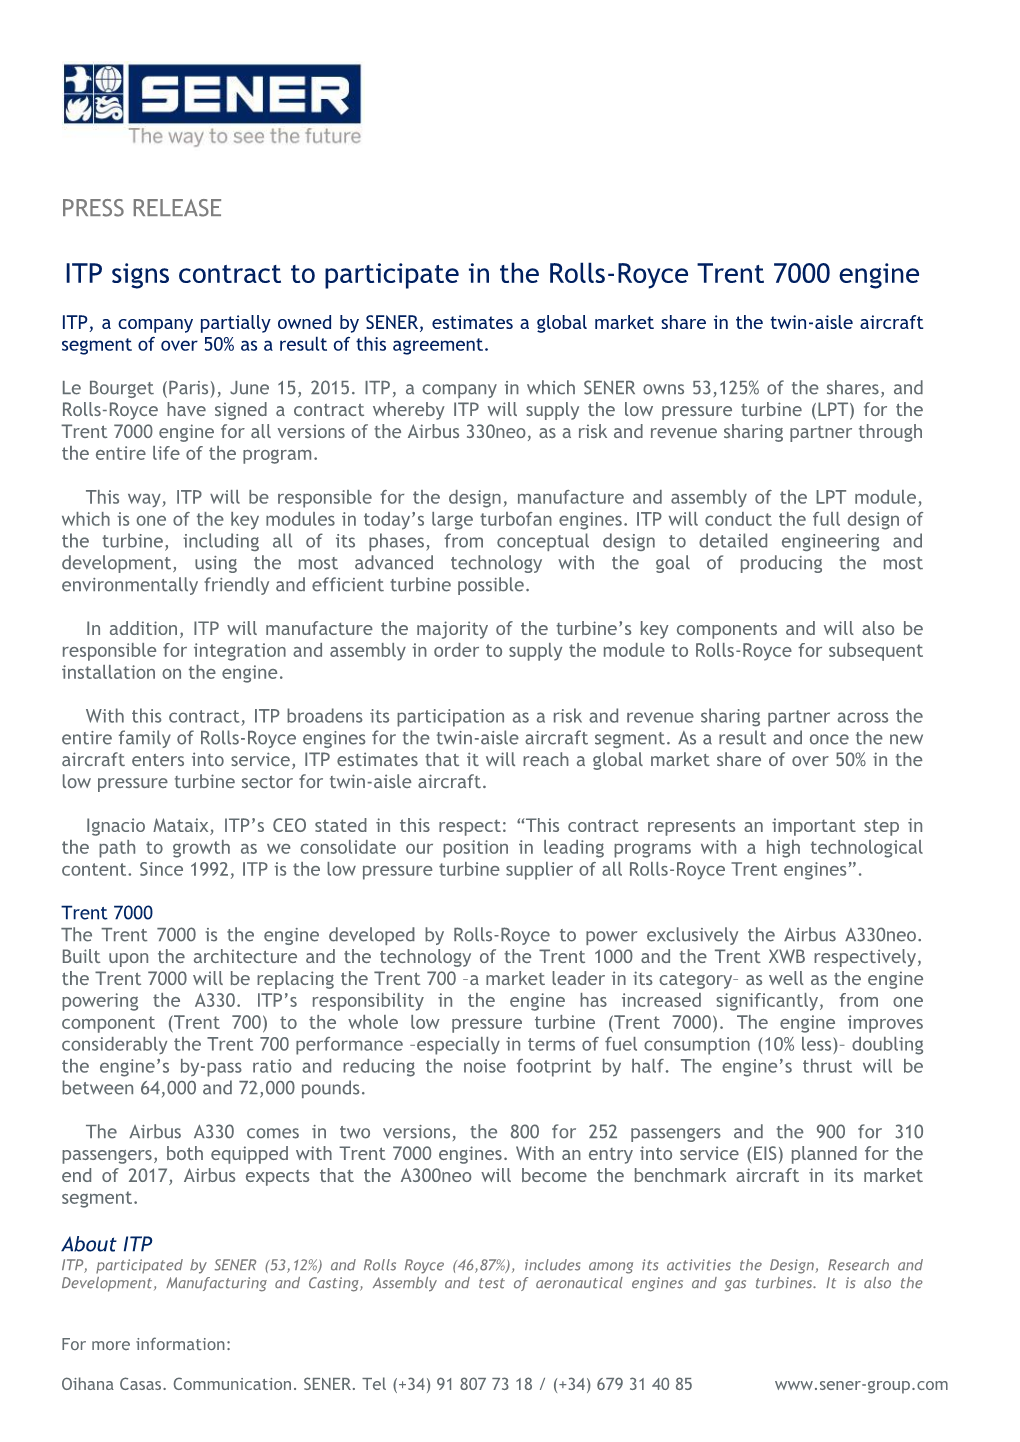 ITP Signs Contract to Participate in the Rolls-Royce Trent 7000 Engine